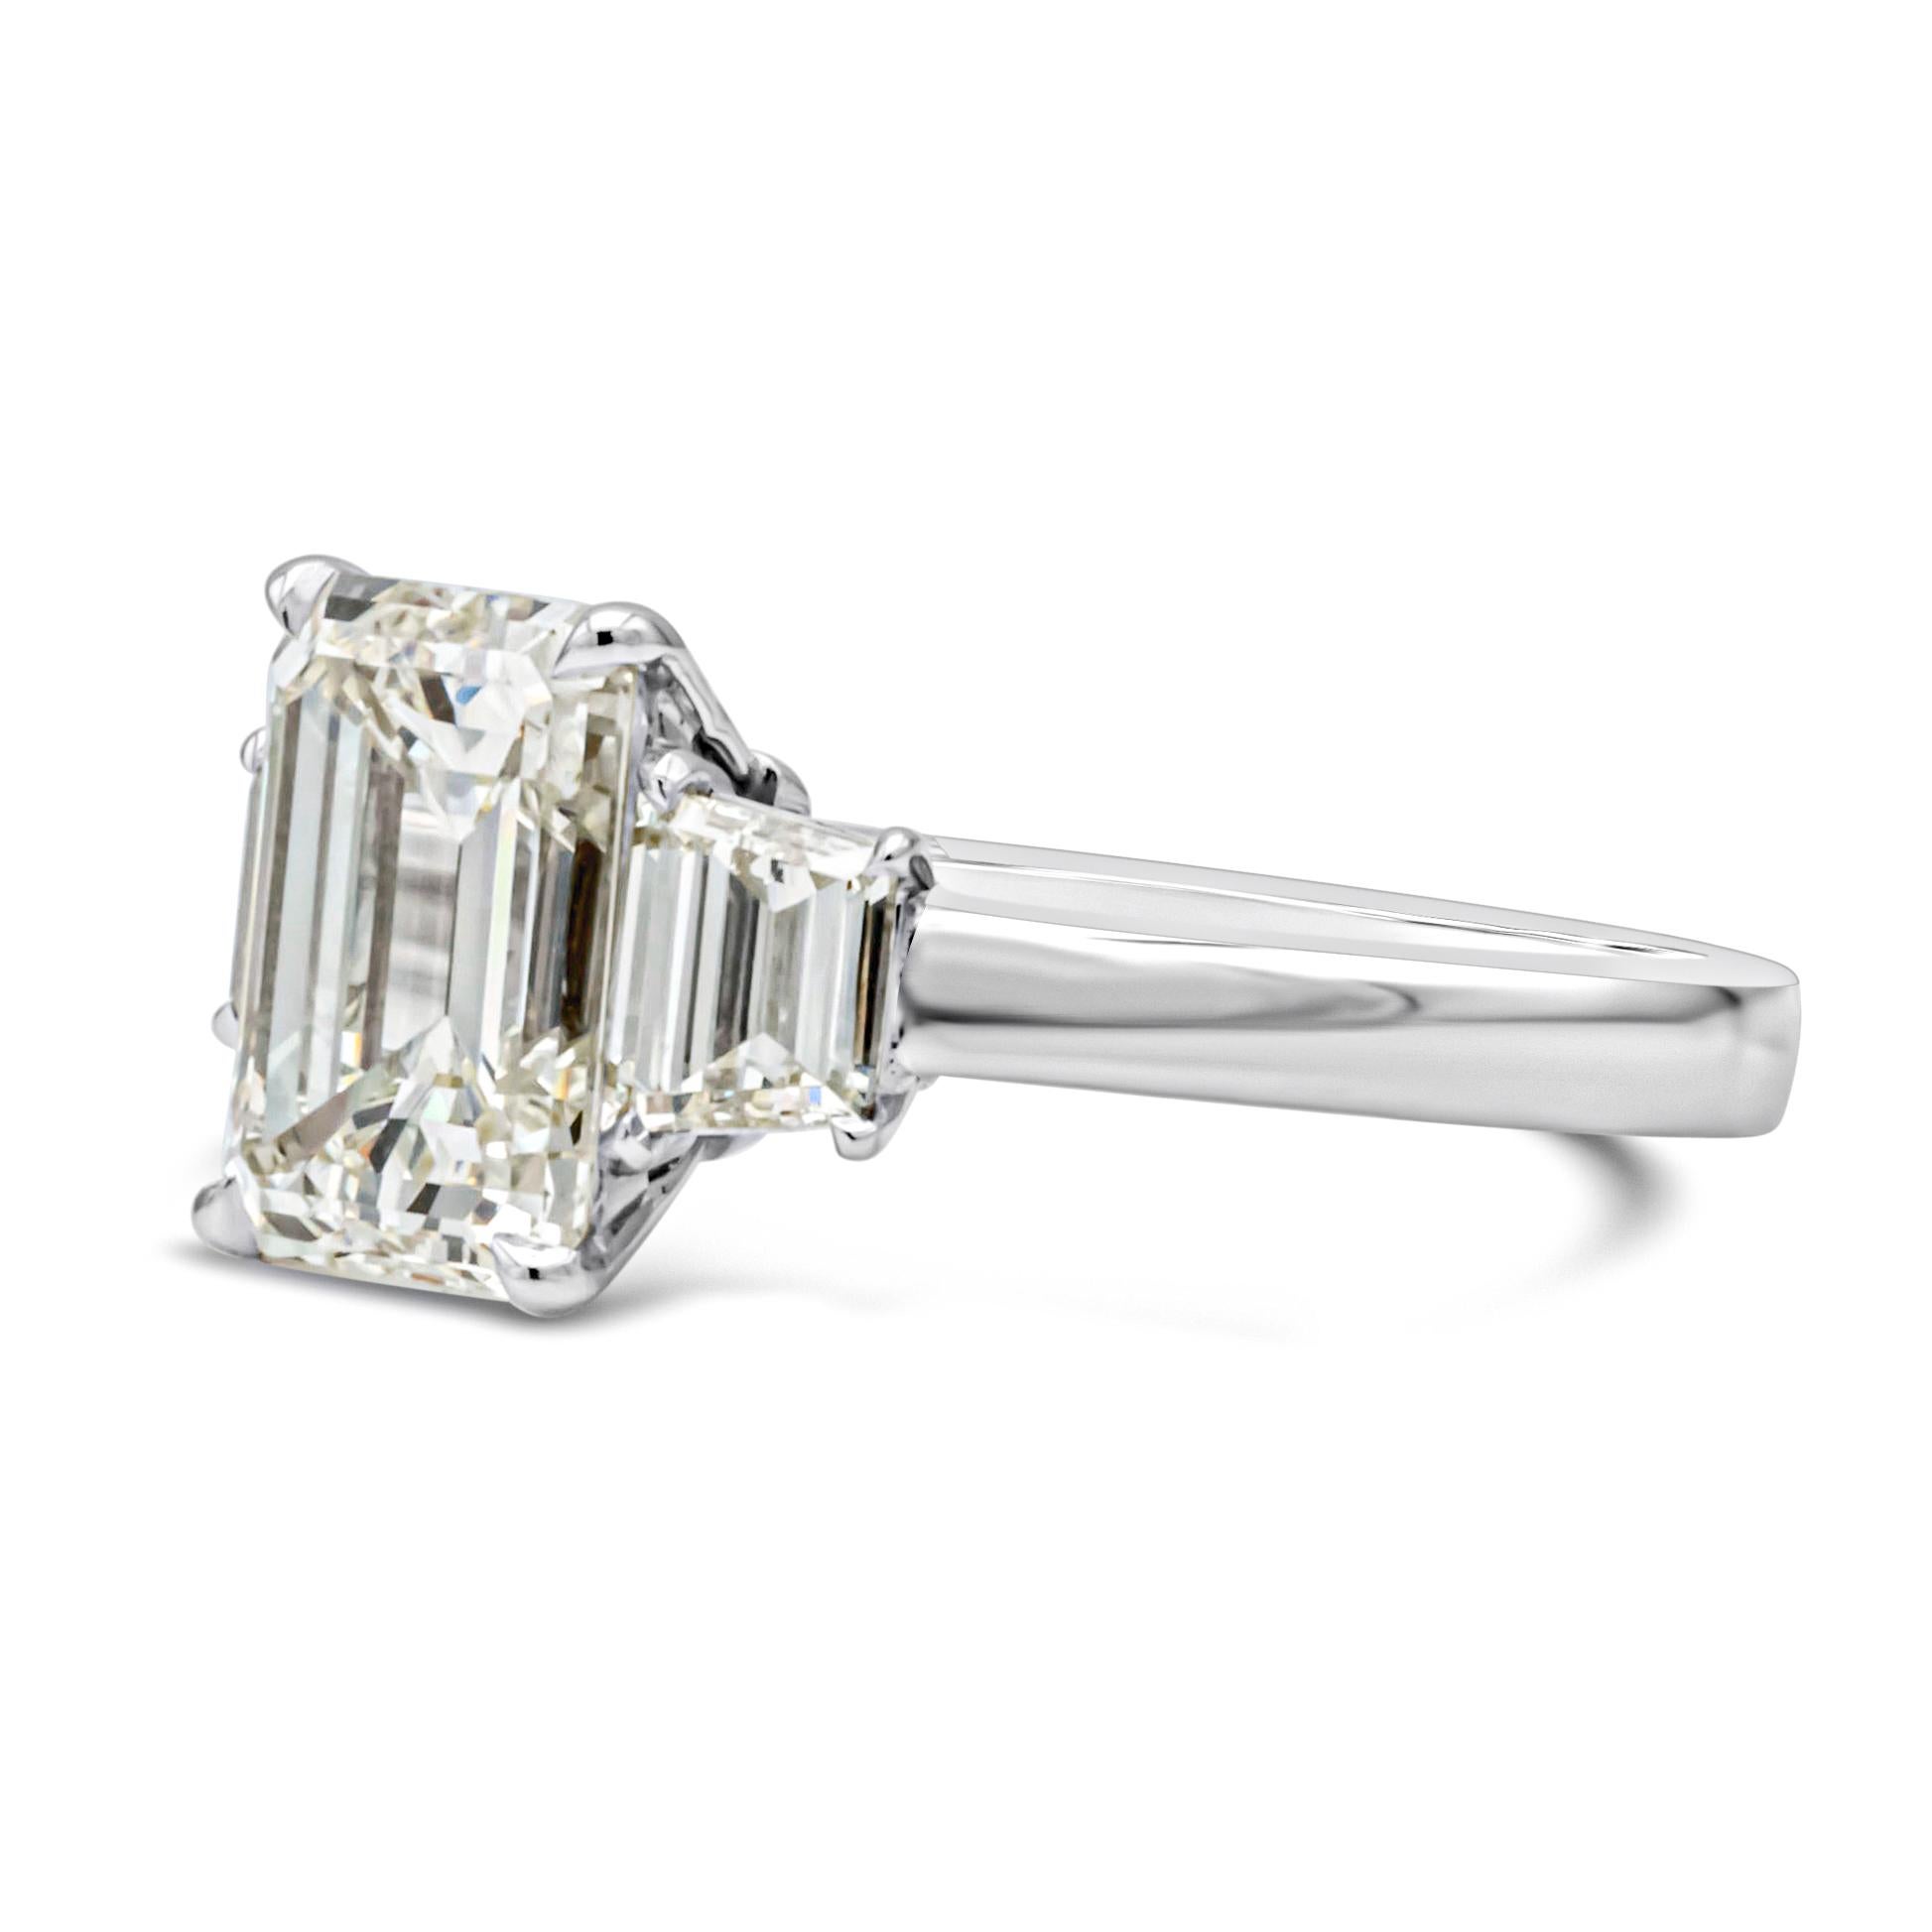 A magnificent and classy three-stone engagement ring, showcasing a 2.96 carats emerald cut diamond certified by GIA as M color and VS1 clarity, set on a four prong setting. Two perfectly matched trapezoid cut diamonds weighing 0.70 carat total with